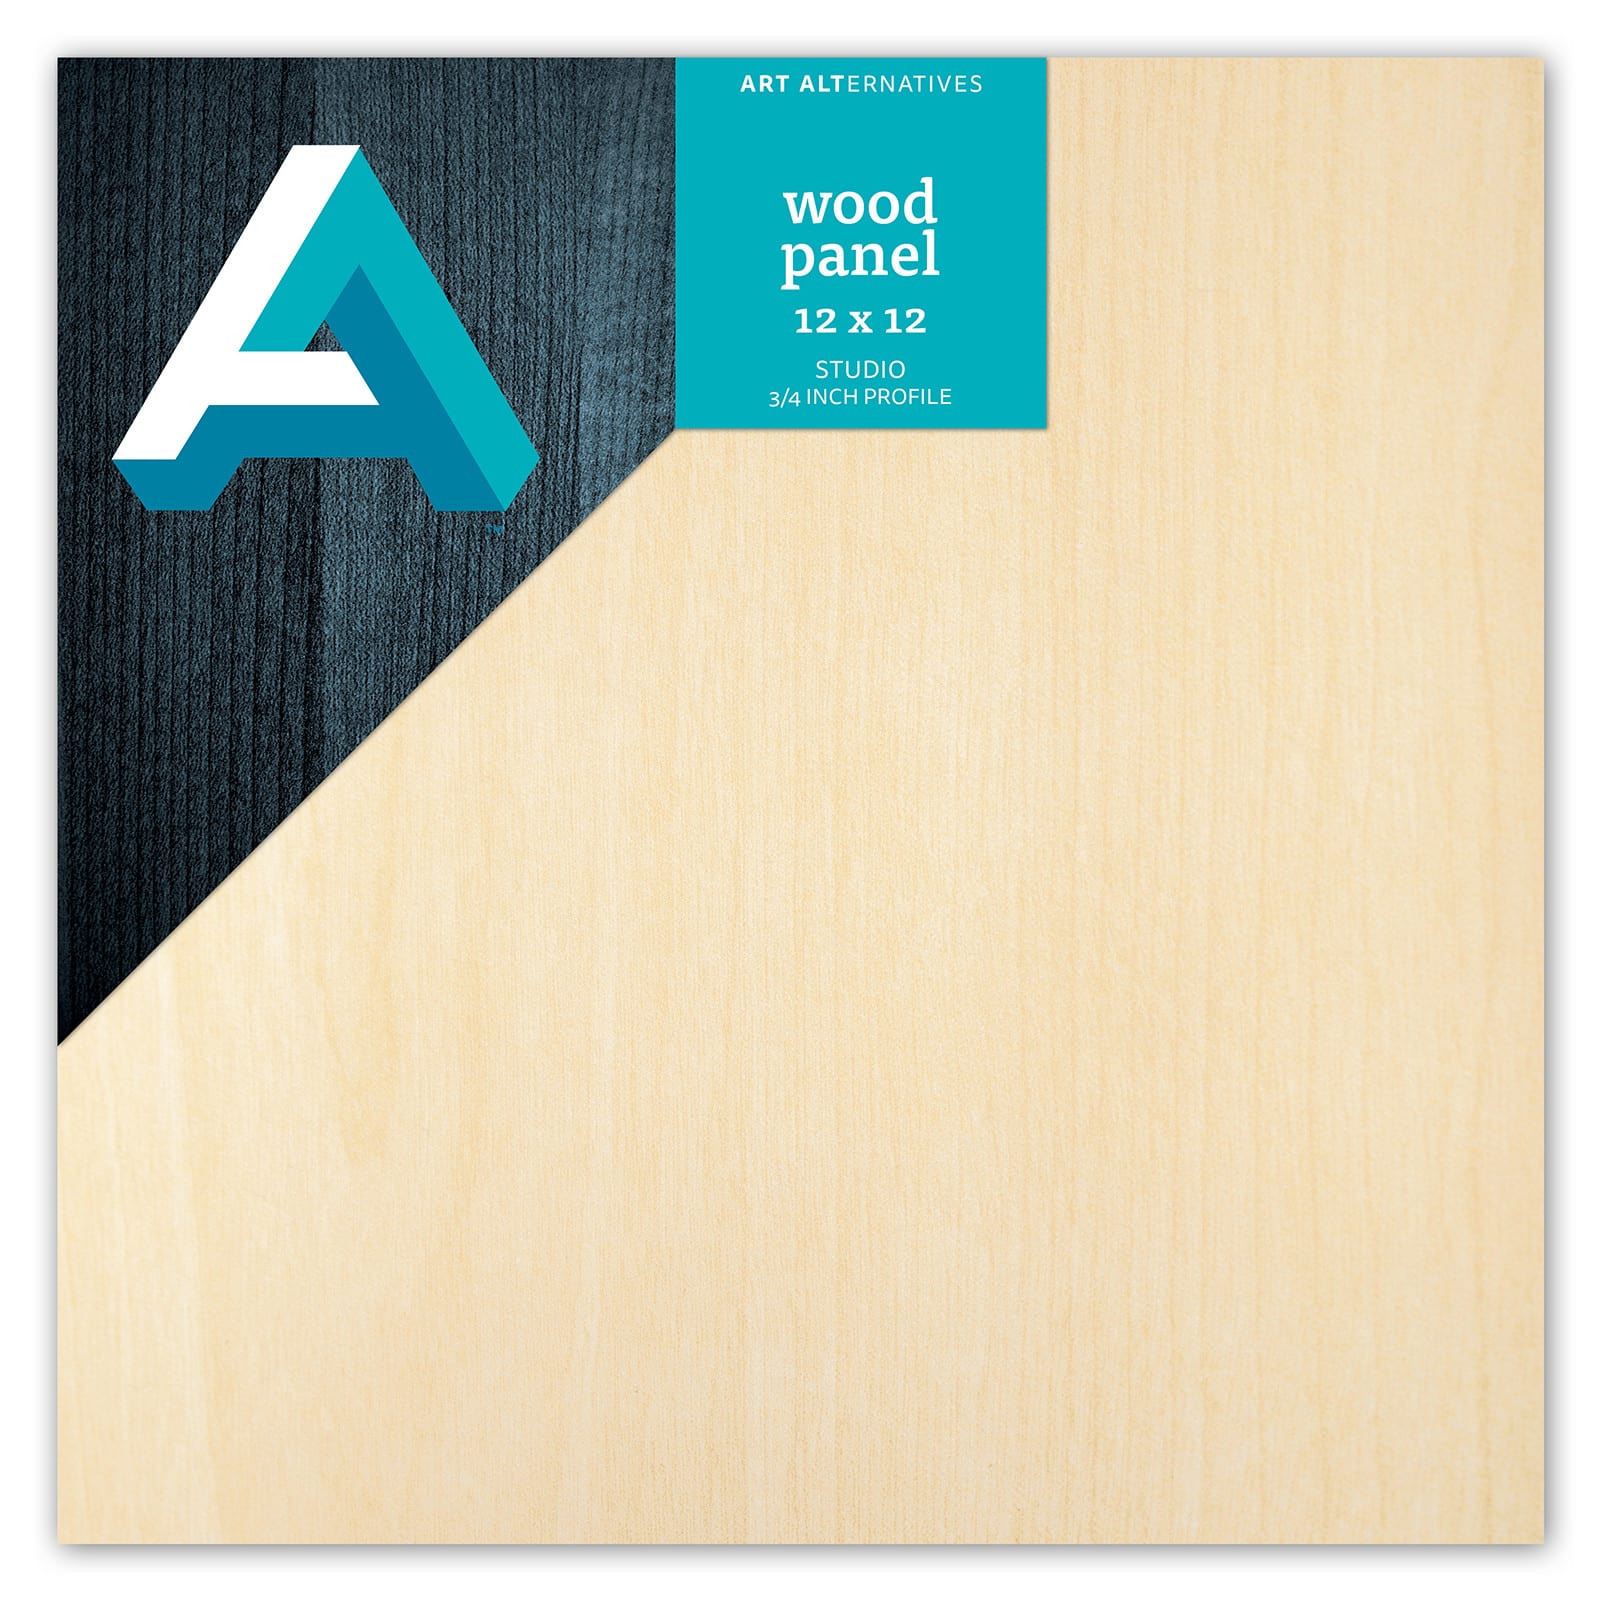 Da Vinci Pro Ultra Smooth Gesso Panels 3/4 inch Panel (Single) 5x7 inch - 12 Pack, Size: 5 x 7, Other